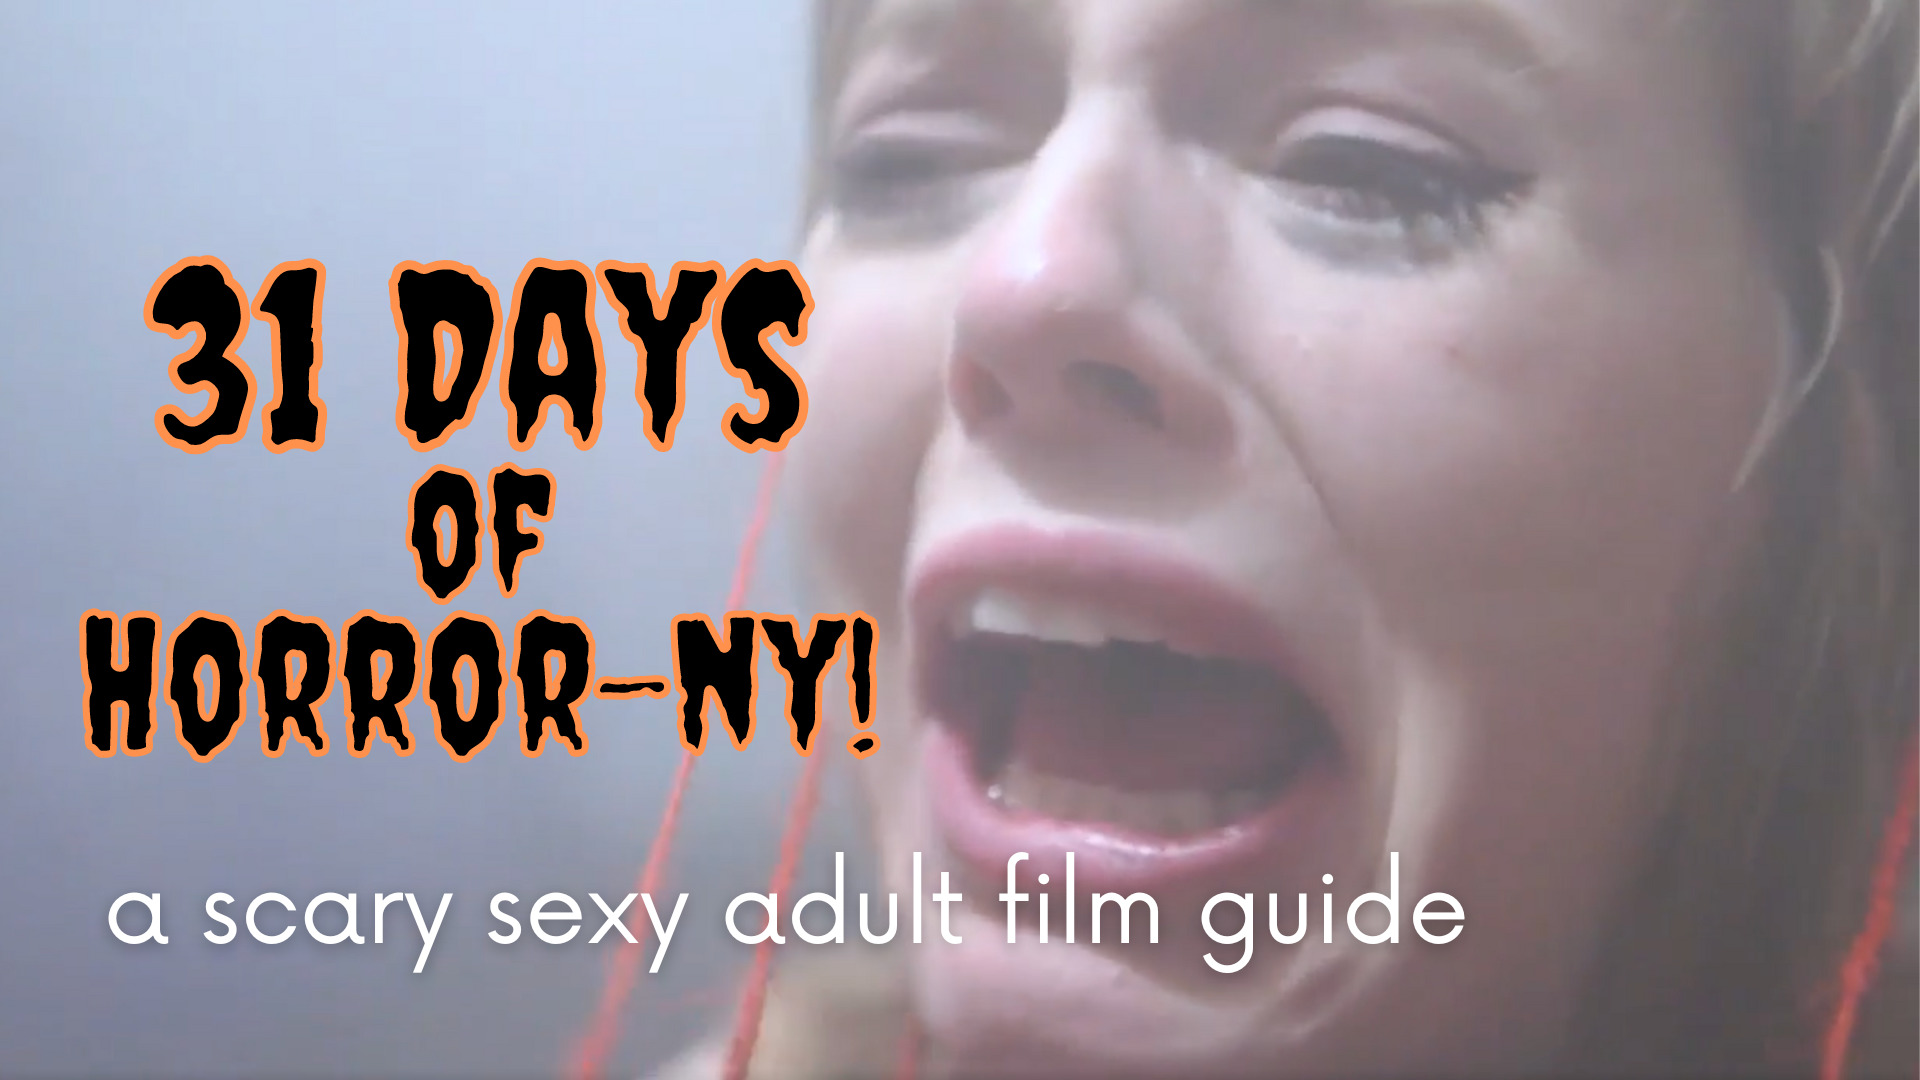 Sexiest Adult Movie - 31 Days of Horror-ny! Scary Sexy Adult Films - PinkLabel.TV